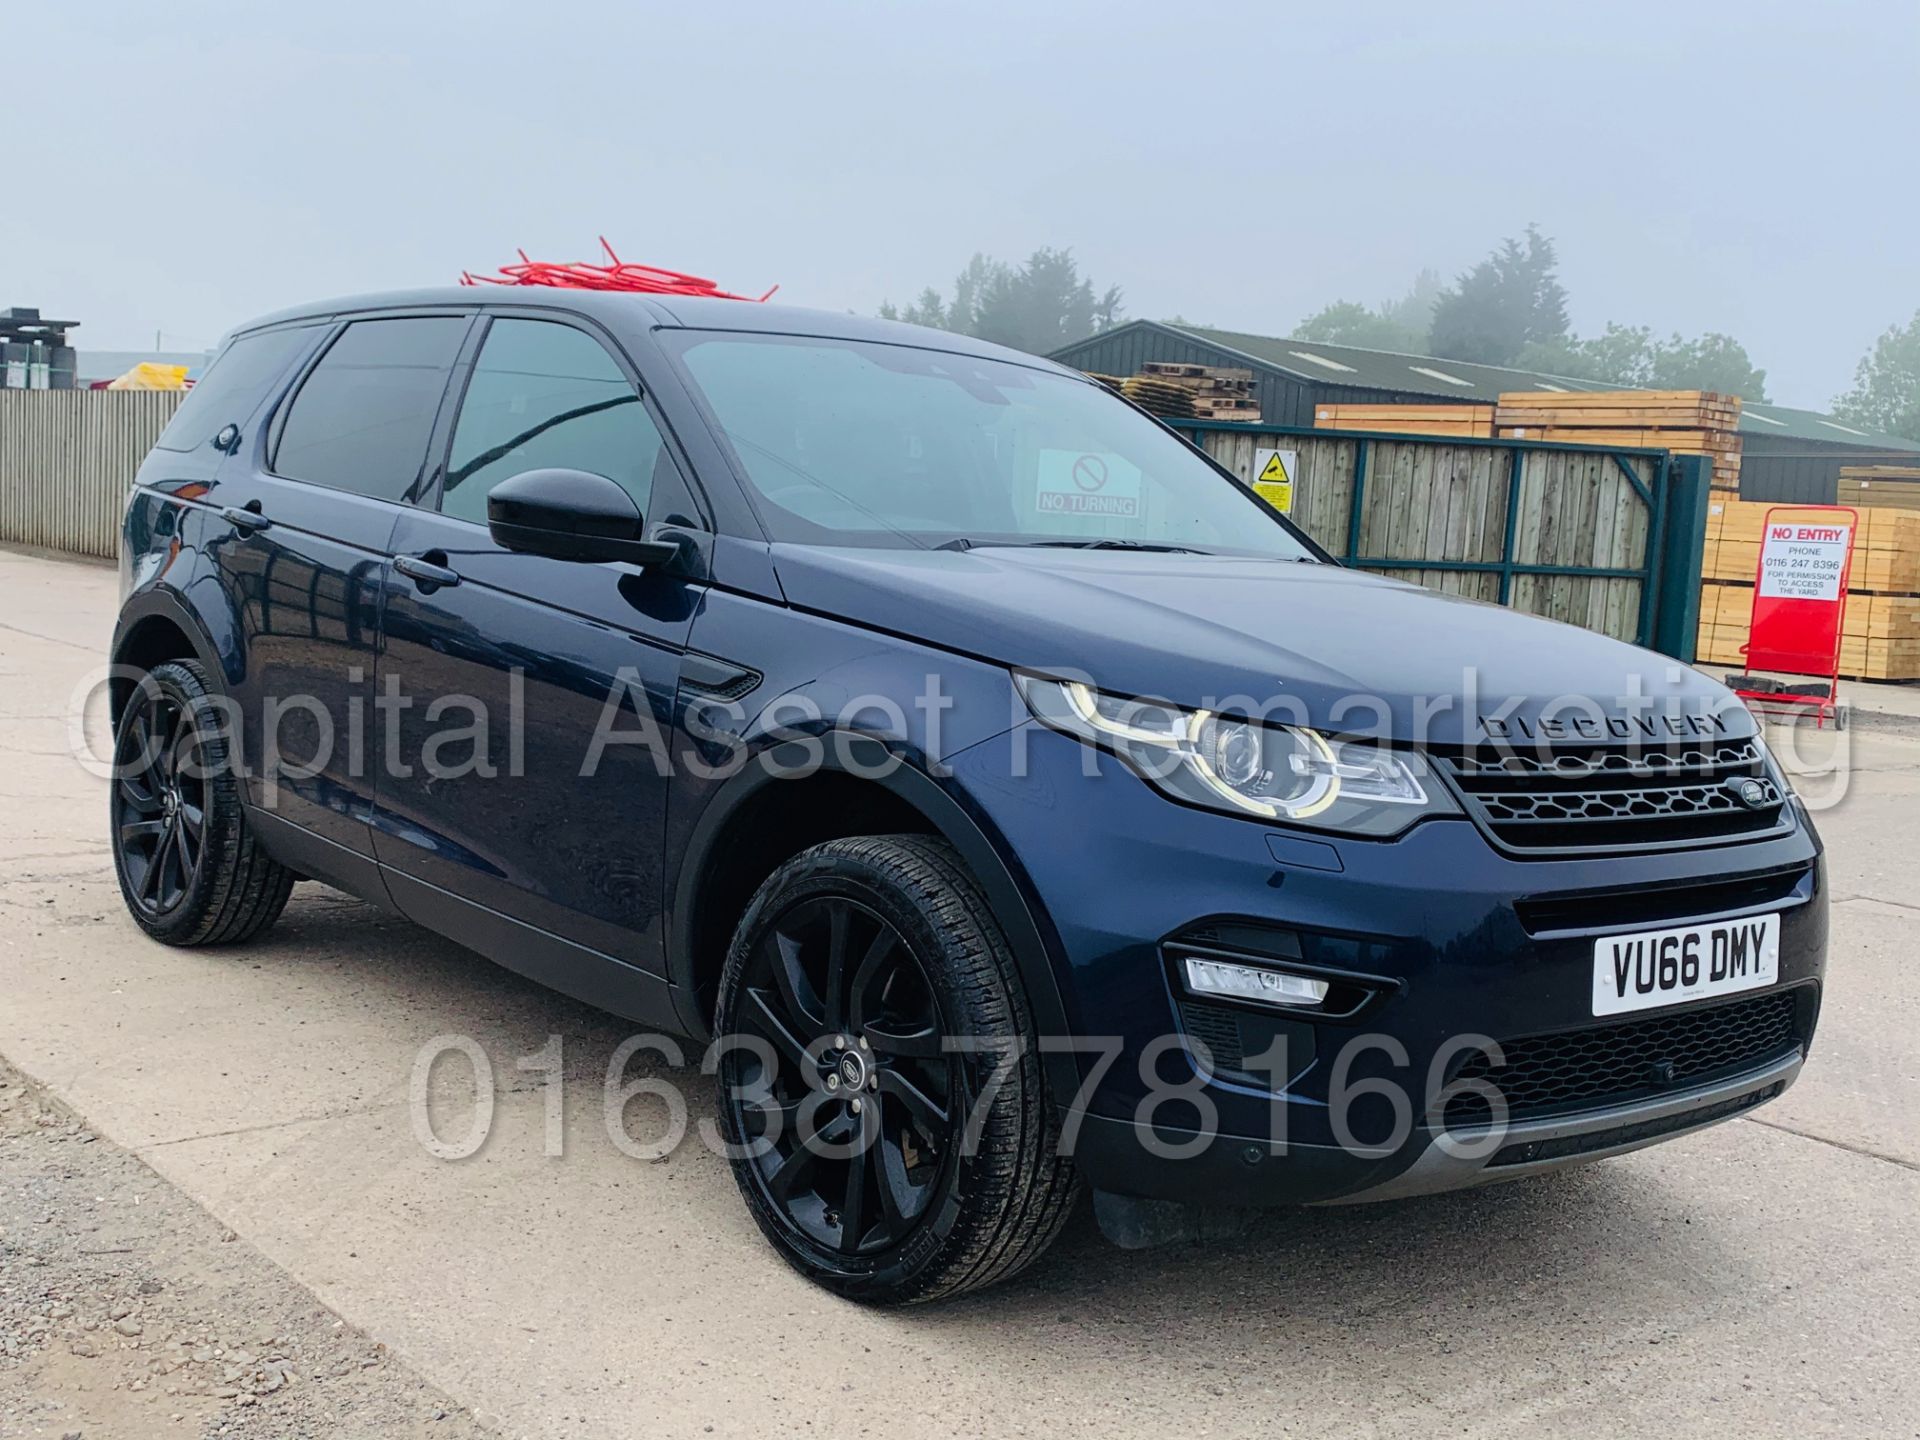 LAND ROVER DISCOVERY SPORT *HSE BLACK EDITION* SUV (2017 MODEL) '2.0 TD4 - AUTO' **MASSIVE SPEC** - Image 3 of 59